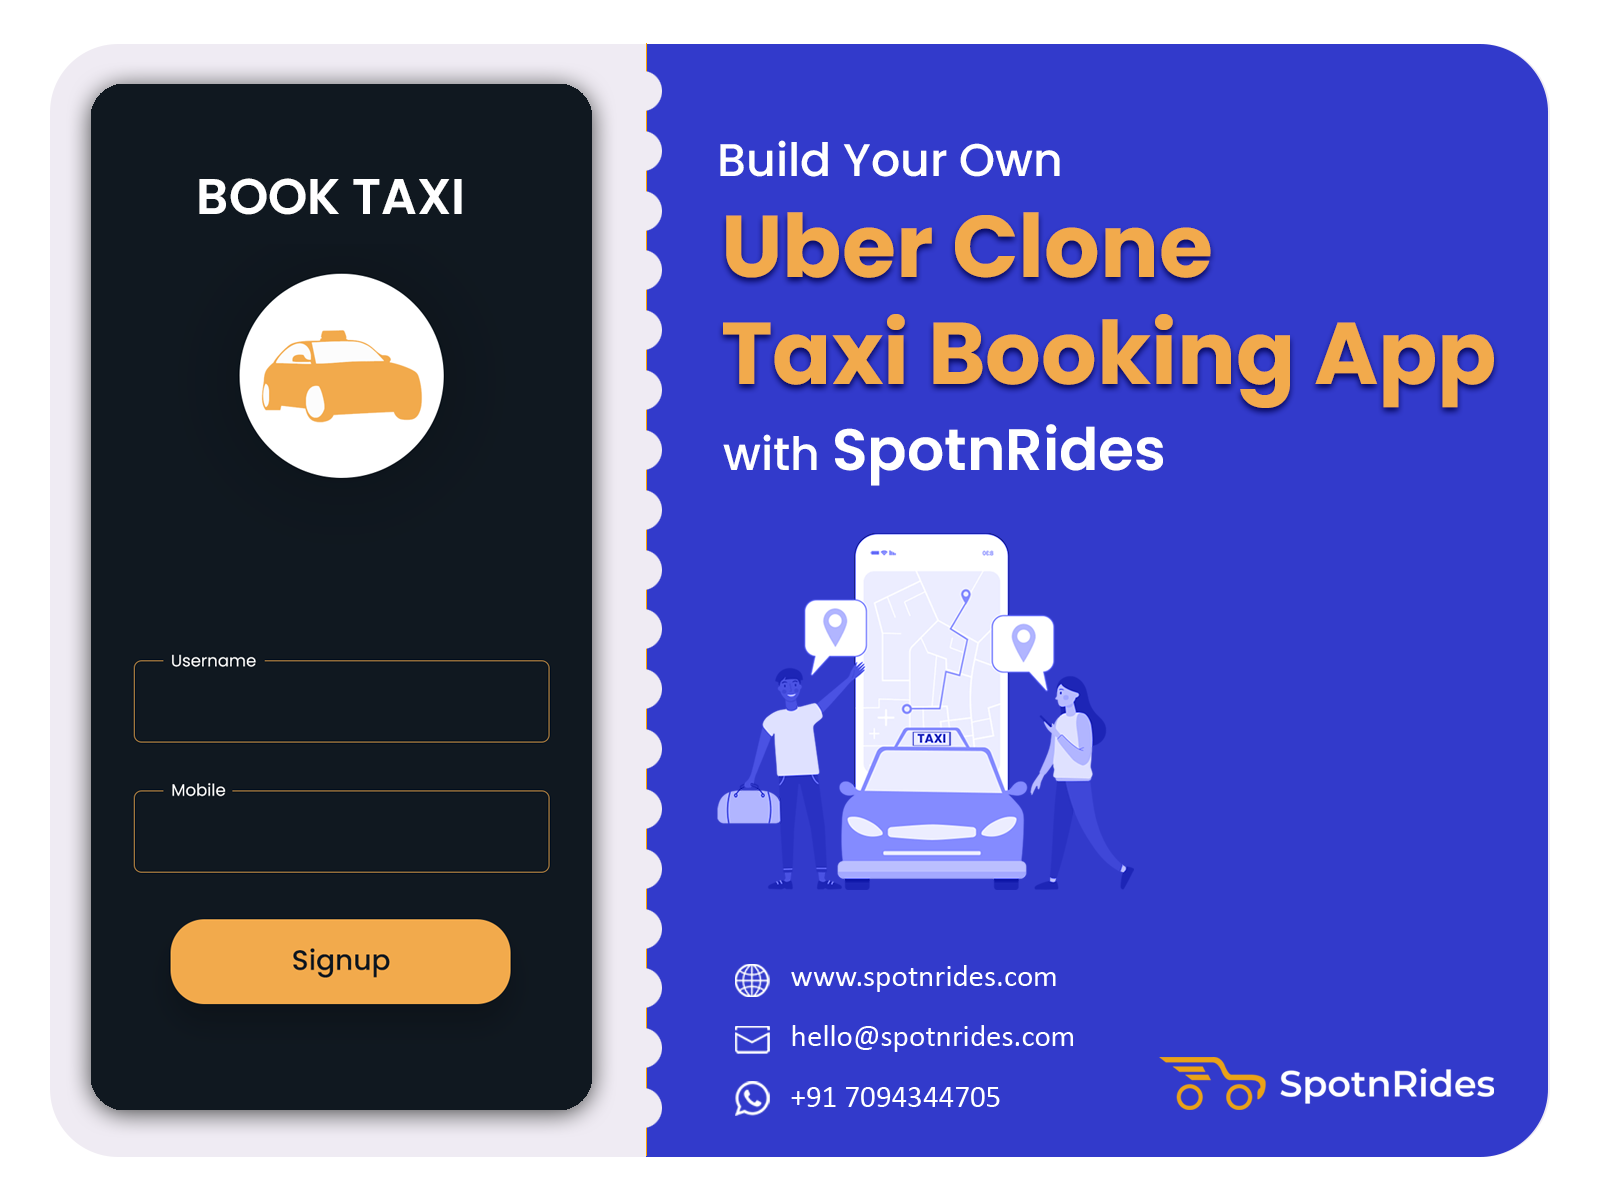 Taxi Booking App Development Services by SpotnRides,Miami,Services,Free Classifieds,Post Free Ads,77traders.com